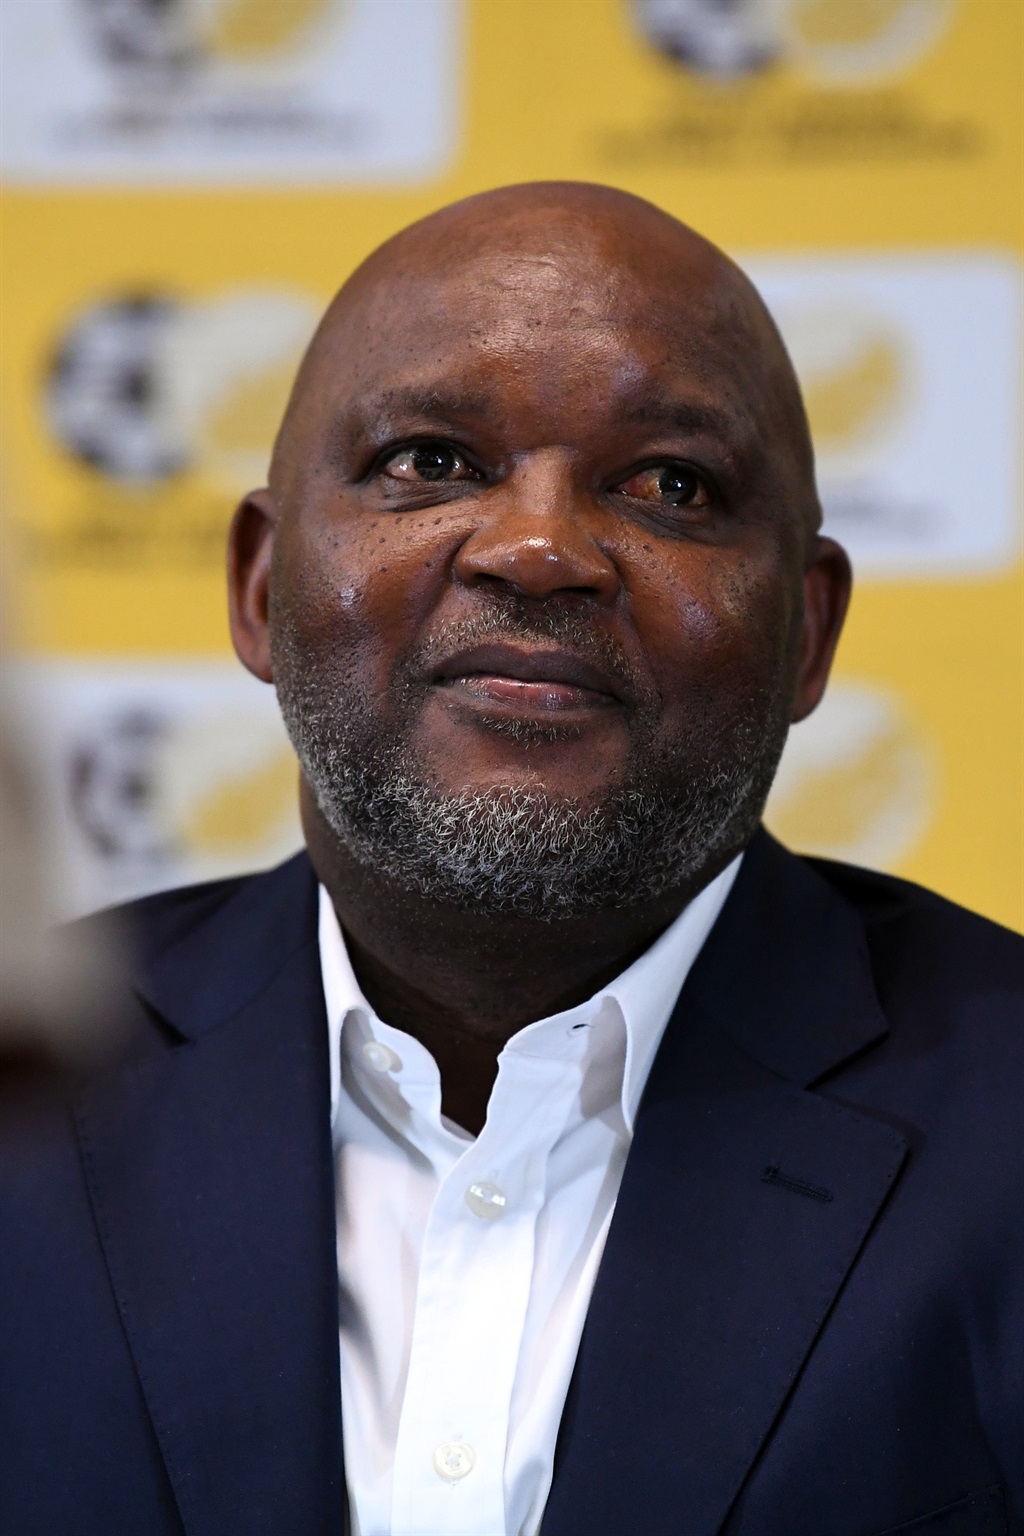 Pitso Mosimane has called on players to make the move abroad.